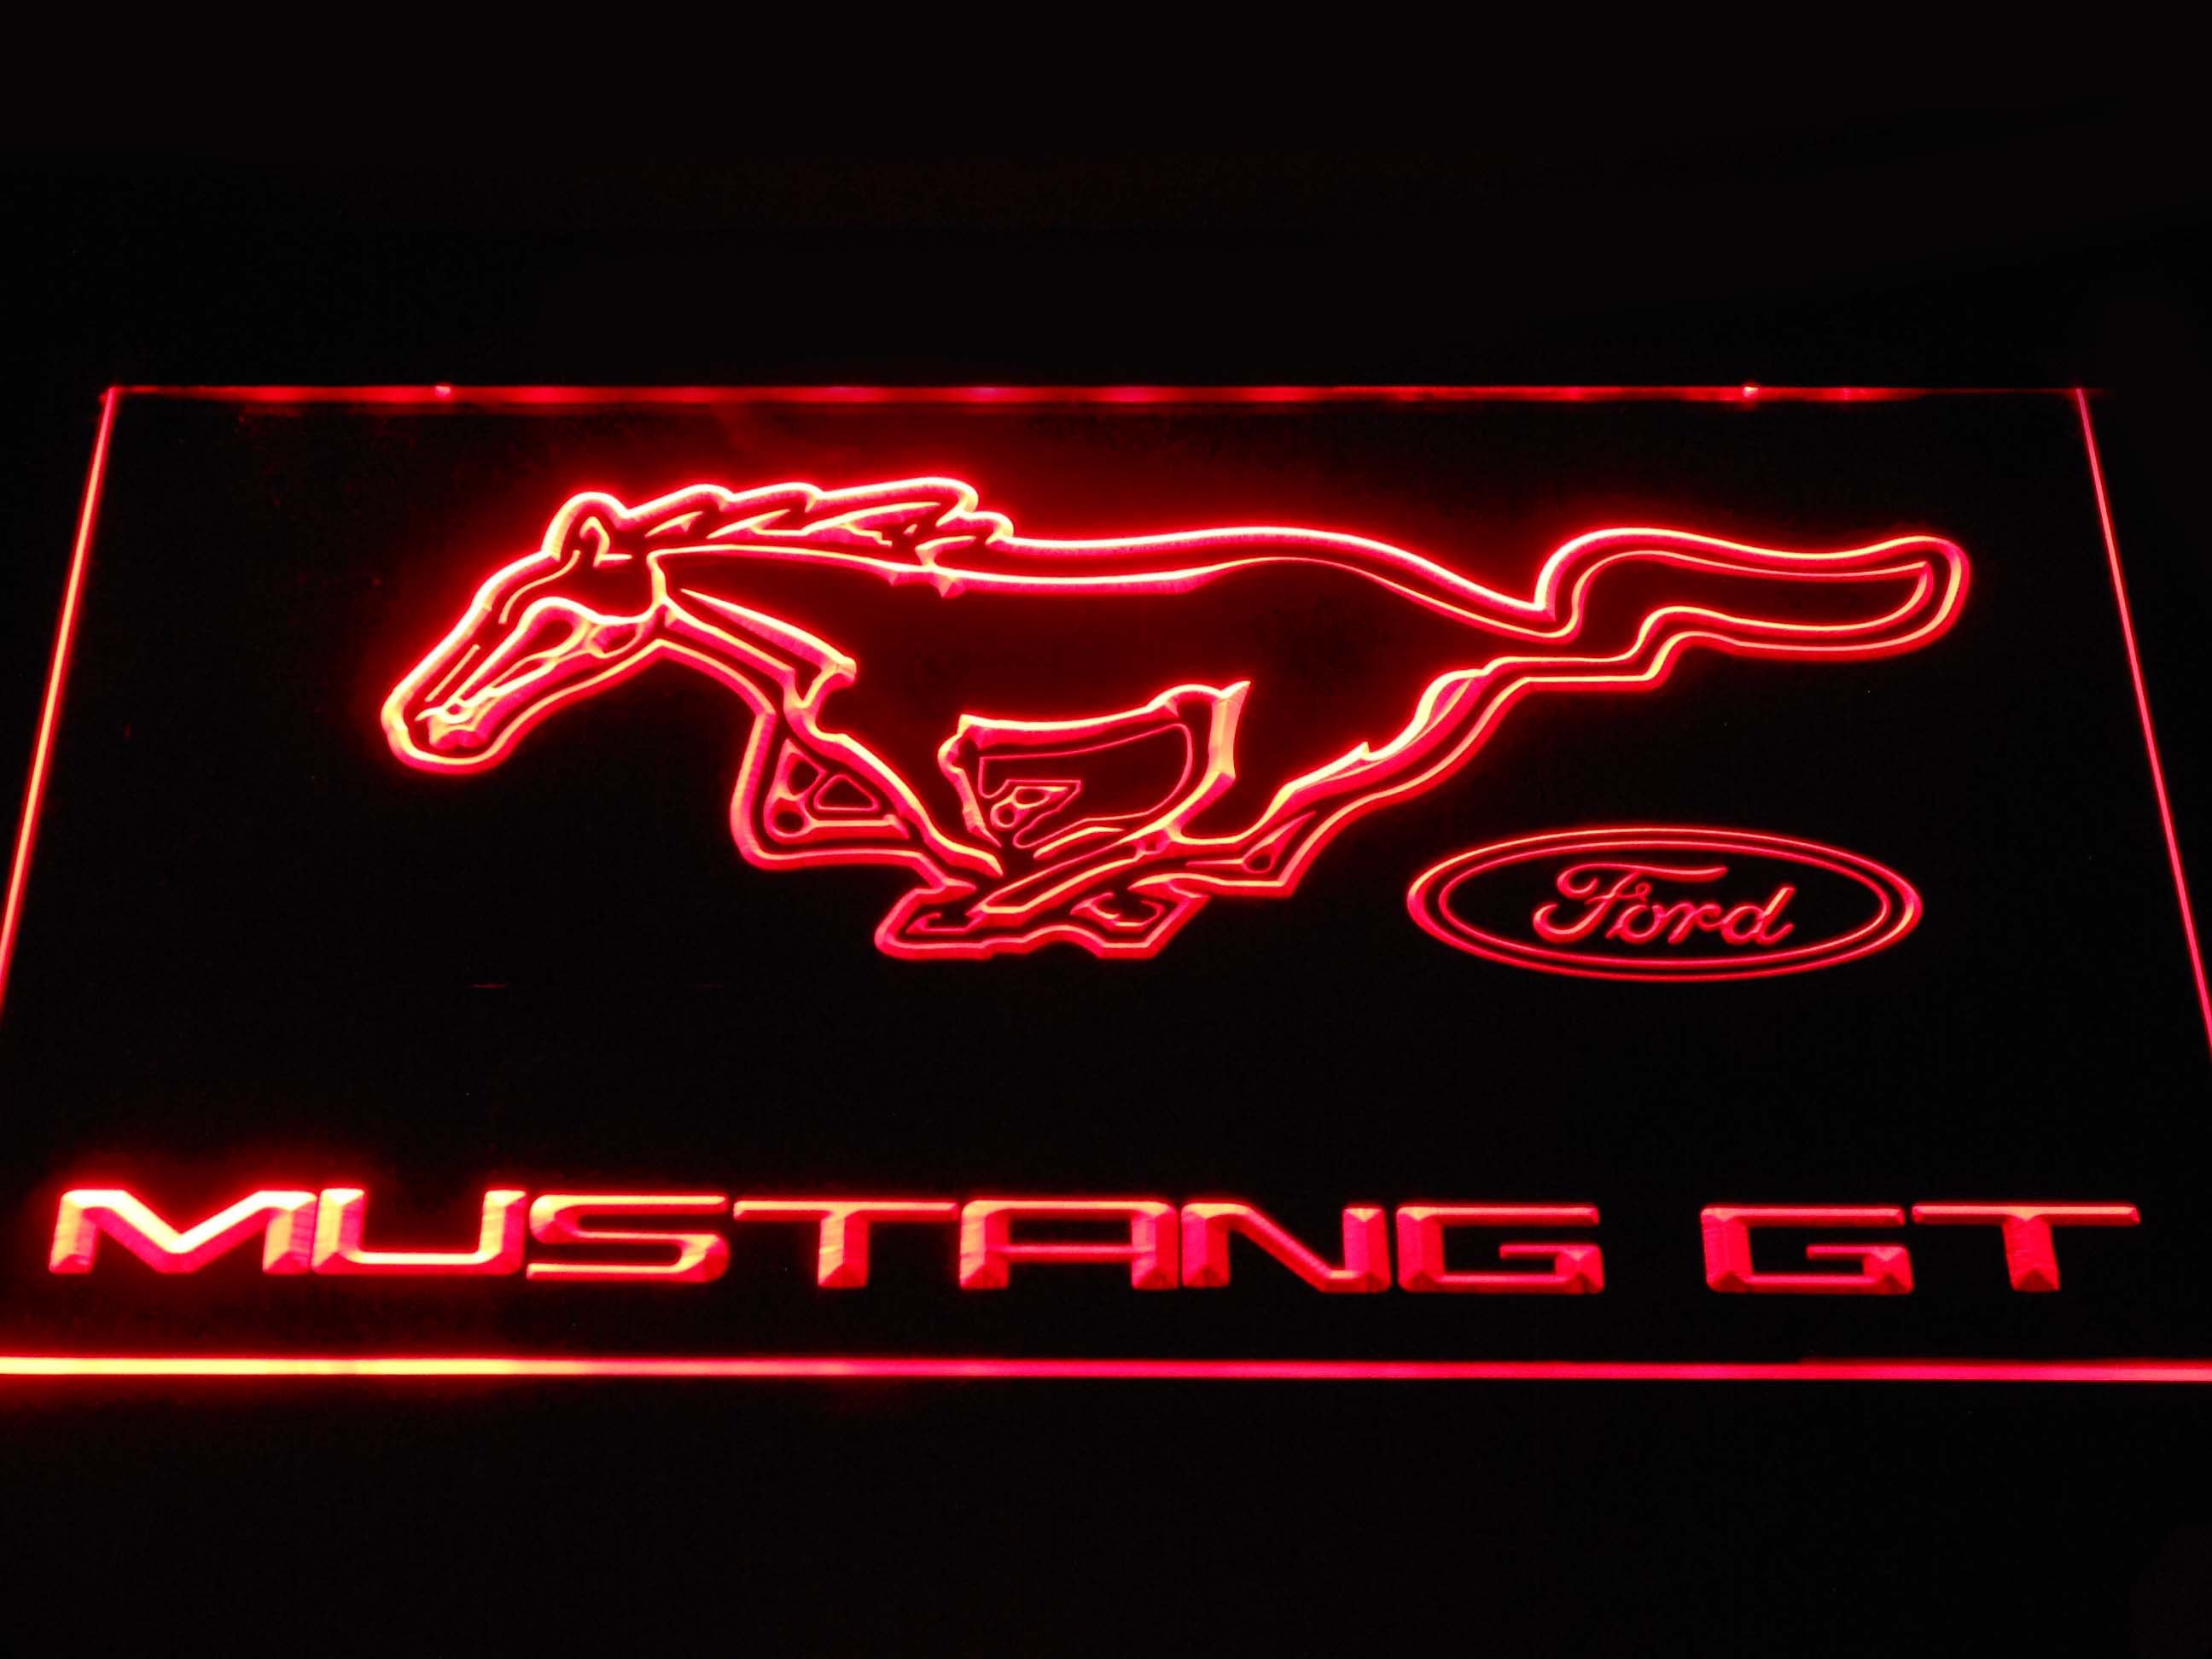 Fords Mustangs GT Neon LED Light Sign